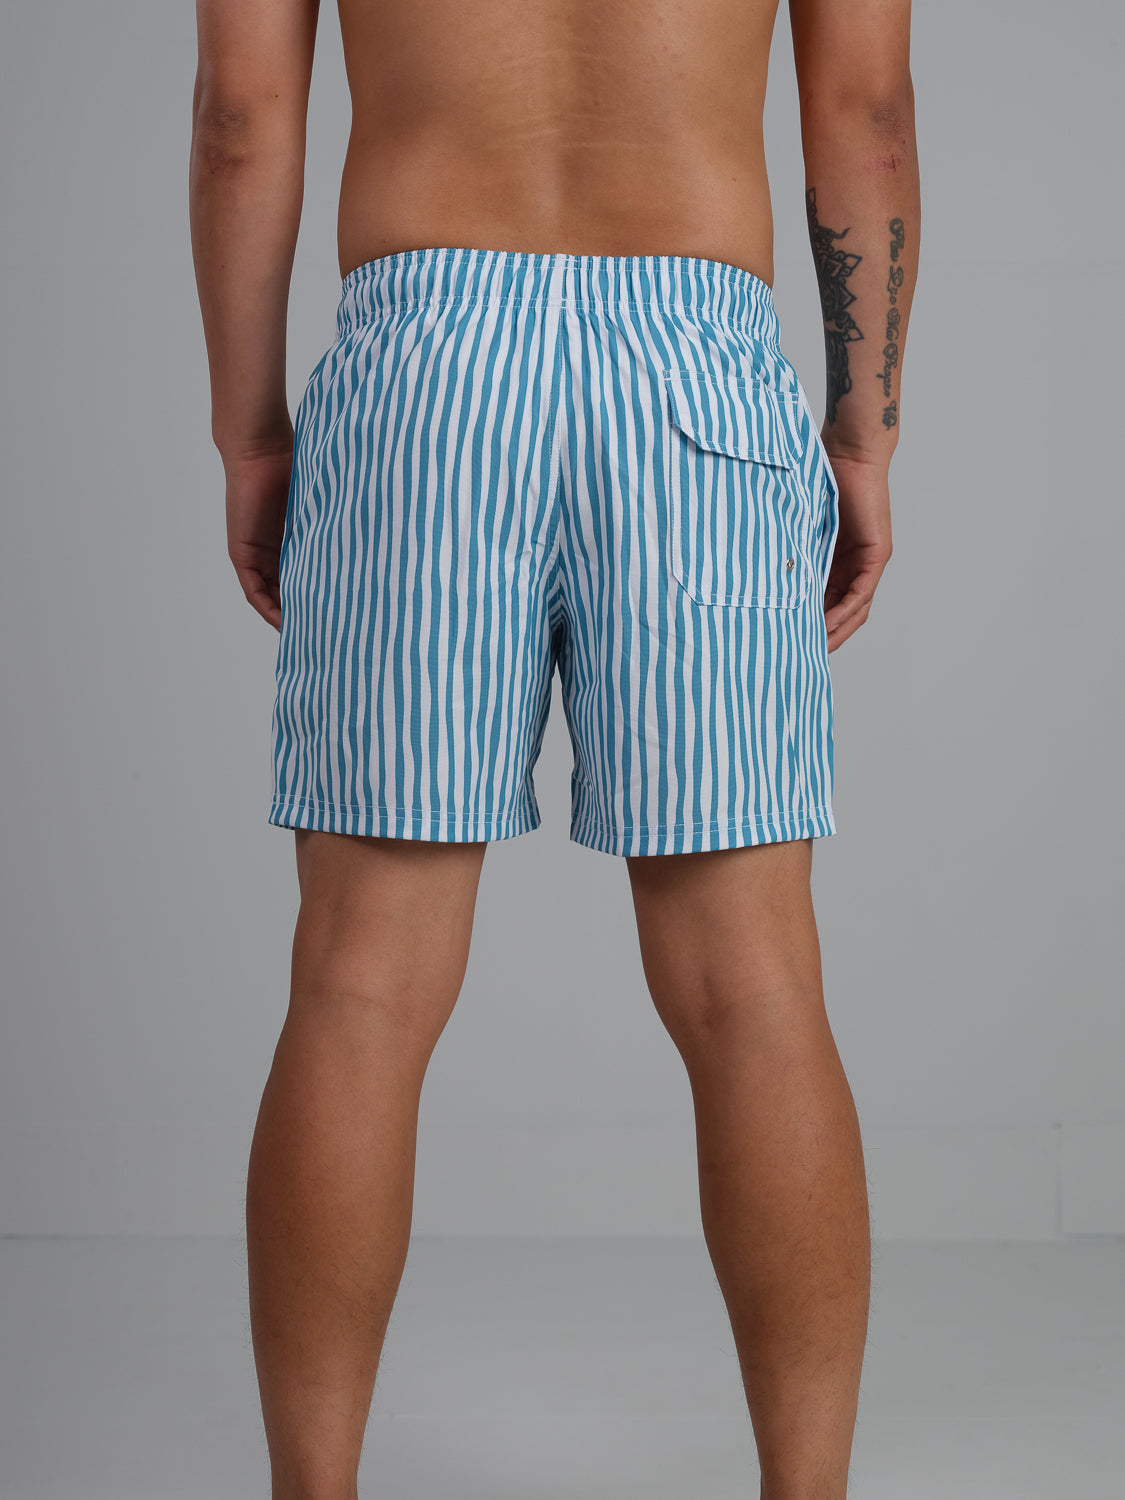 Aqua Lines Striped Swim Trunk with Fast Dry and Stretch